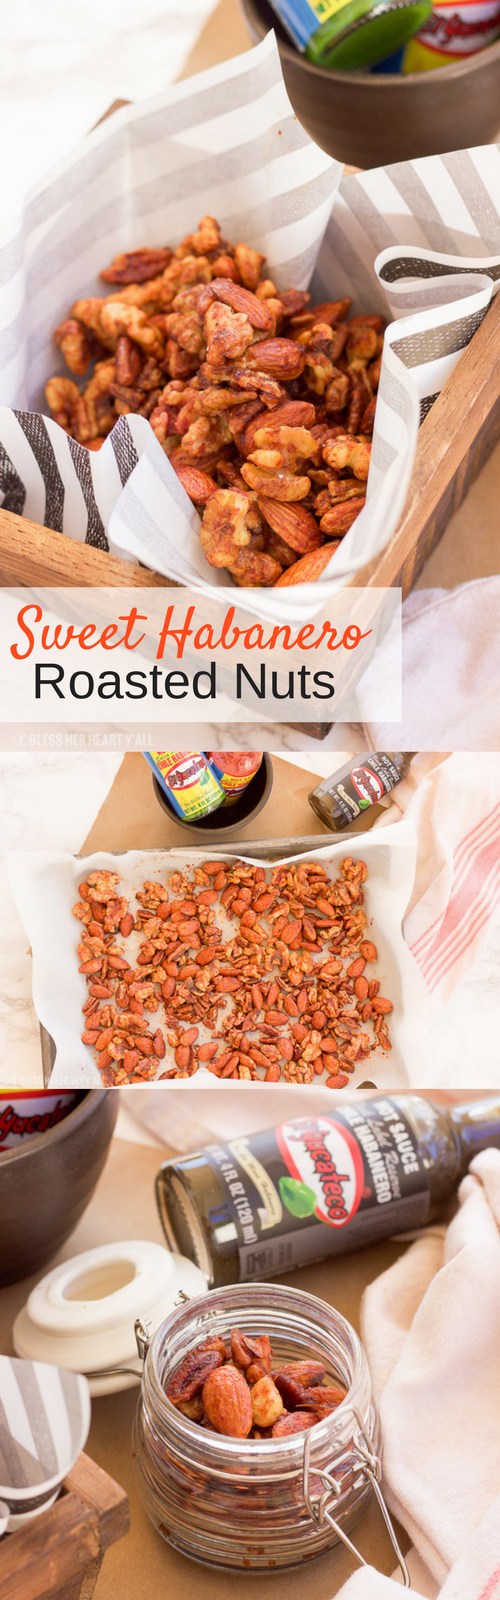 This sweet habanero roasted nut recipe combines sweet coconut sugar with garlic and habanero sauce before perfectly roasting your favorite nuts. The sweet and spicy finger food snack is perfect for tailgating and holiday parties.